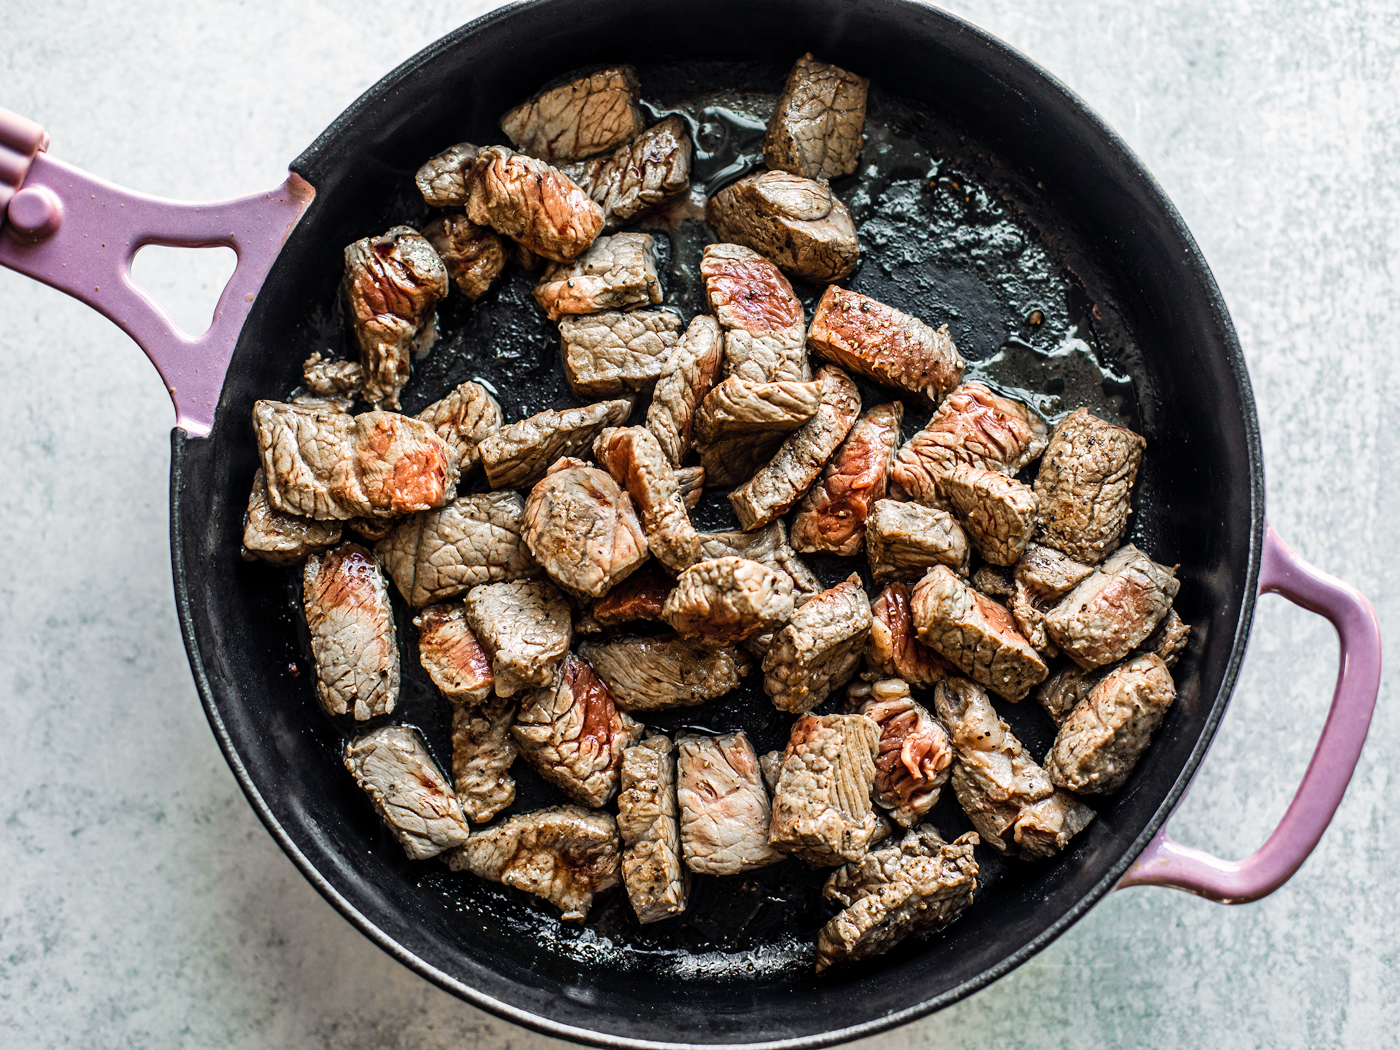 Chunks of medium-rare cooked beef in a skillet.